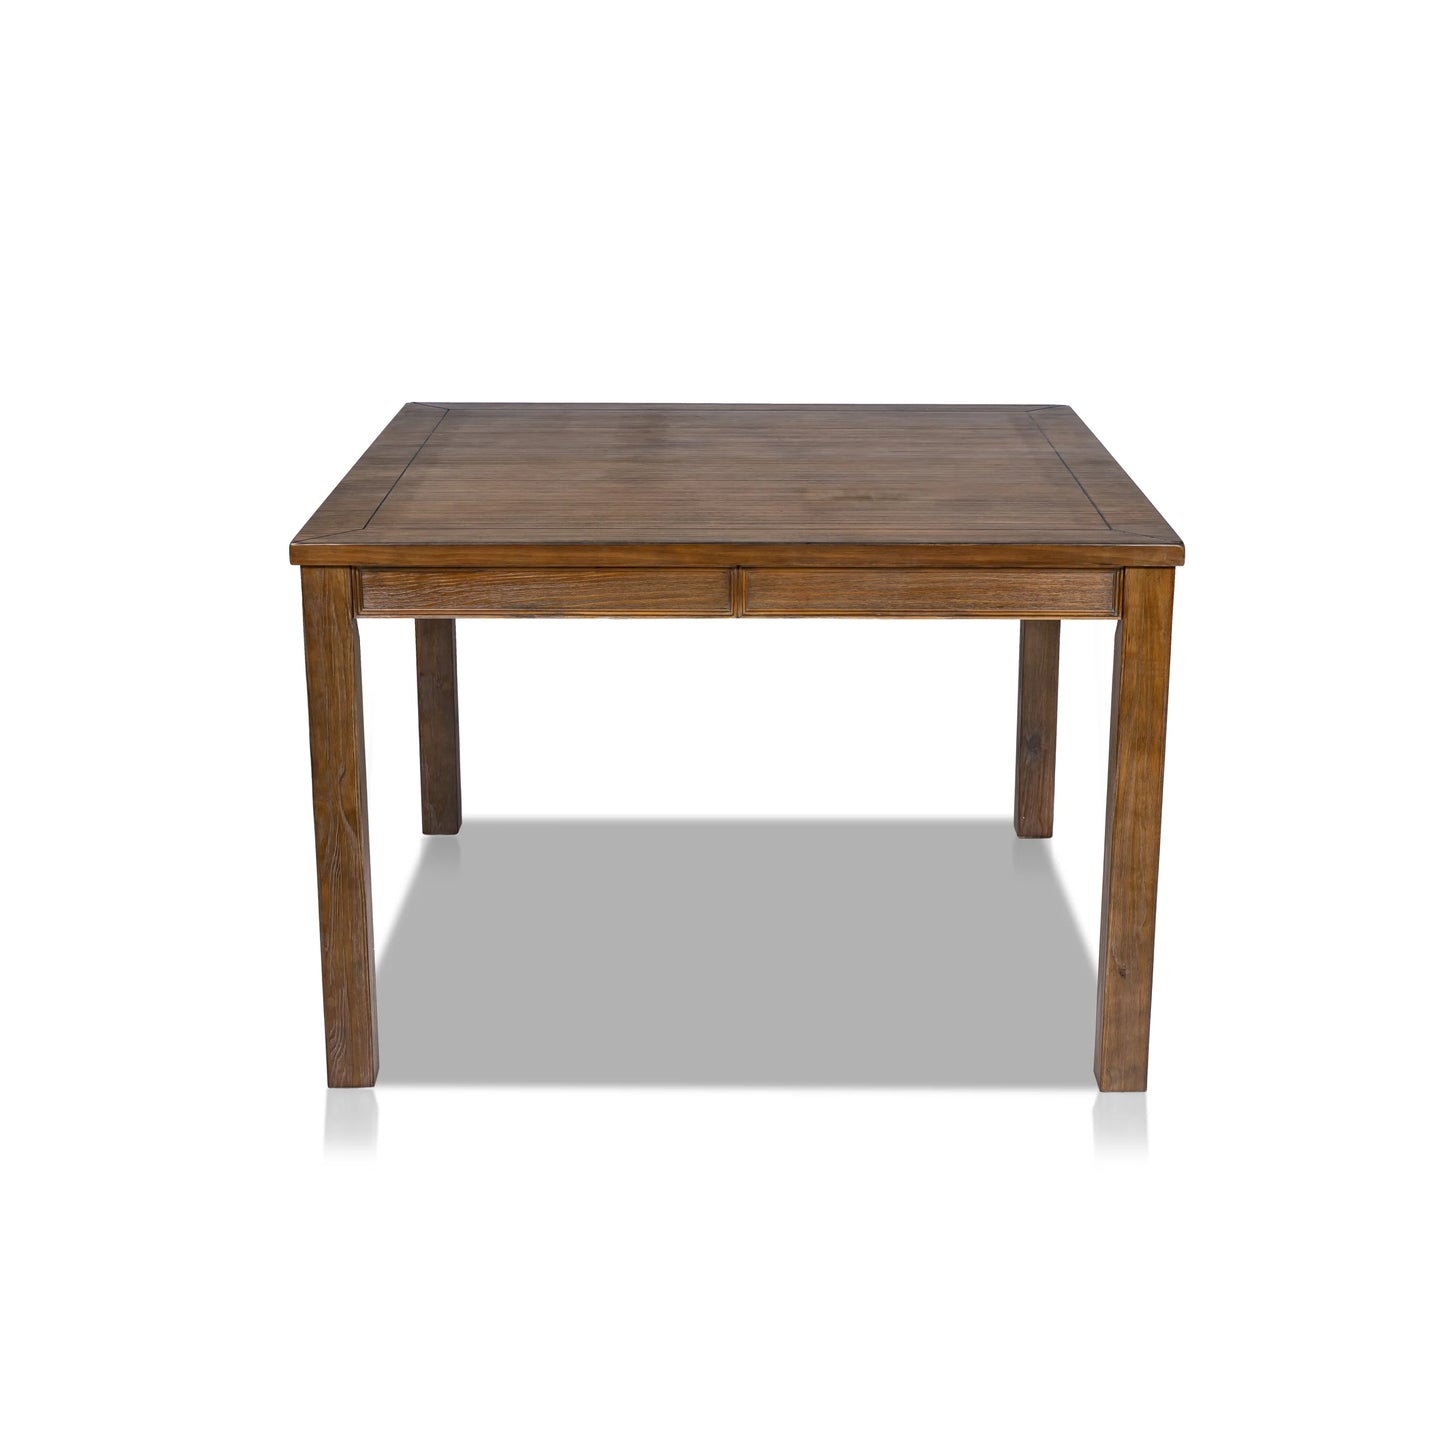 Furniture of America Lubbers Rustic Square Counter Height Table in Rustic Oak - IDF-3324A-PT-54